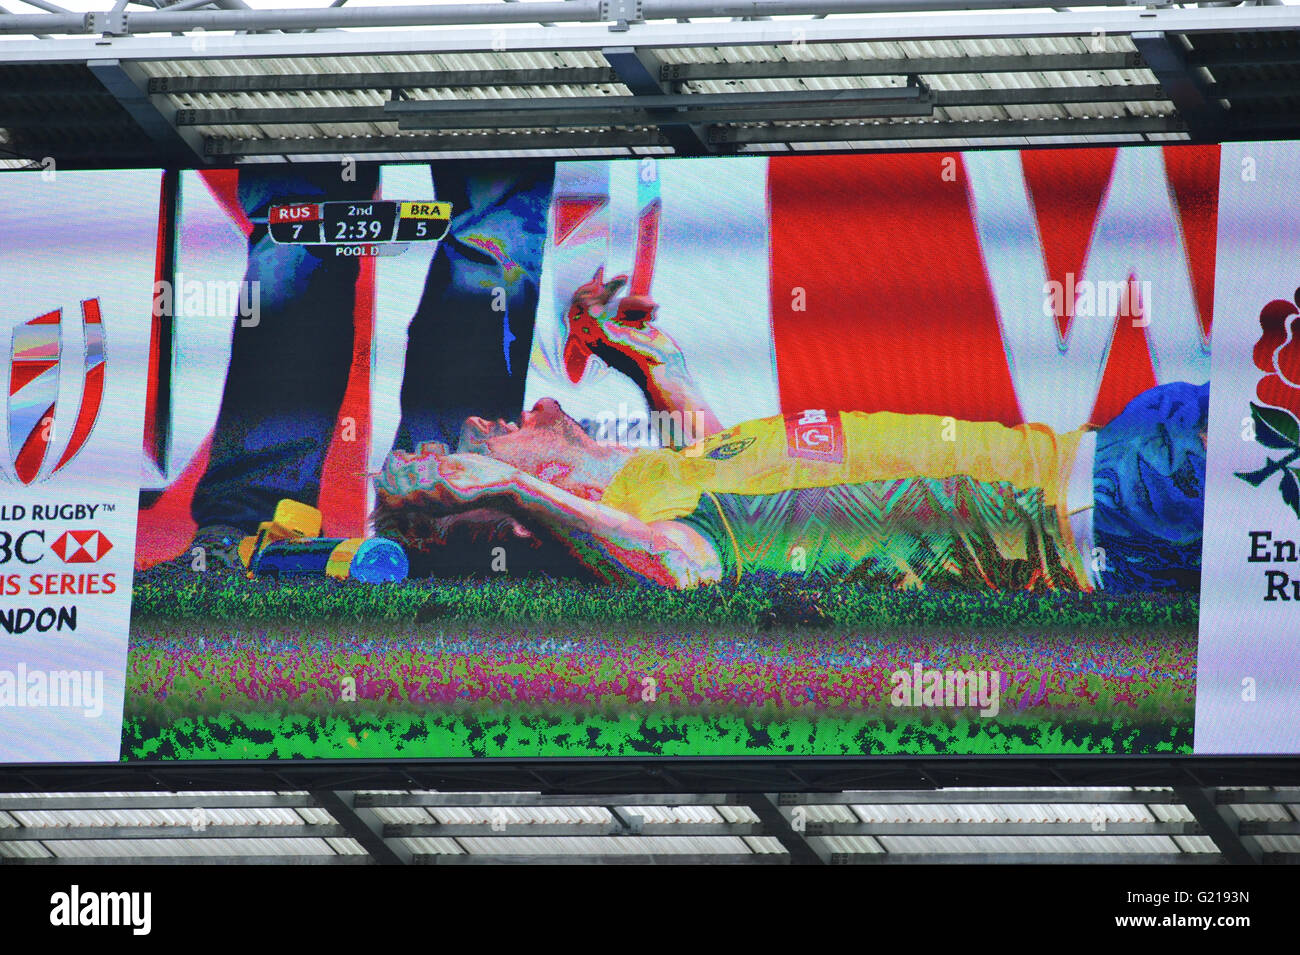 London, UK. 21st May, 2016. Lucas Muller (BRA) lying on the pitch in agony (as seen on a stadium projection screen) after an aggressive tackle in their pool match with Russia, HSBC World Rugby Sevens Series, Twickenham Stadium, London, UK. He was eventually stretchered off the pitch. Russia went on to win the match by 14-5. Credit:  Michael Preston/Alamy Live News Stock Photo